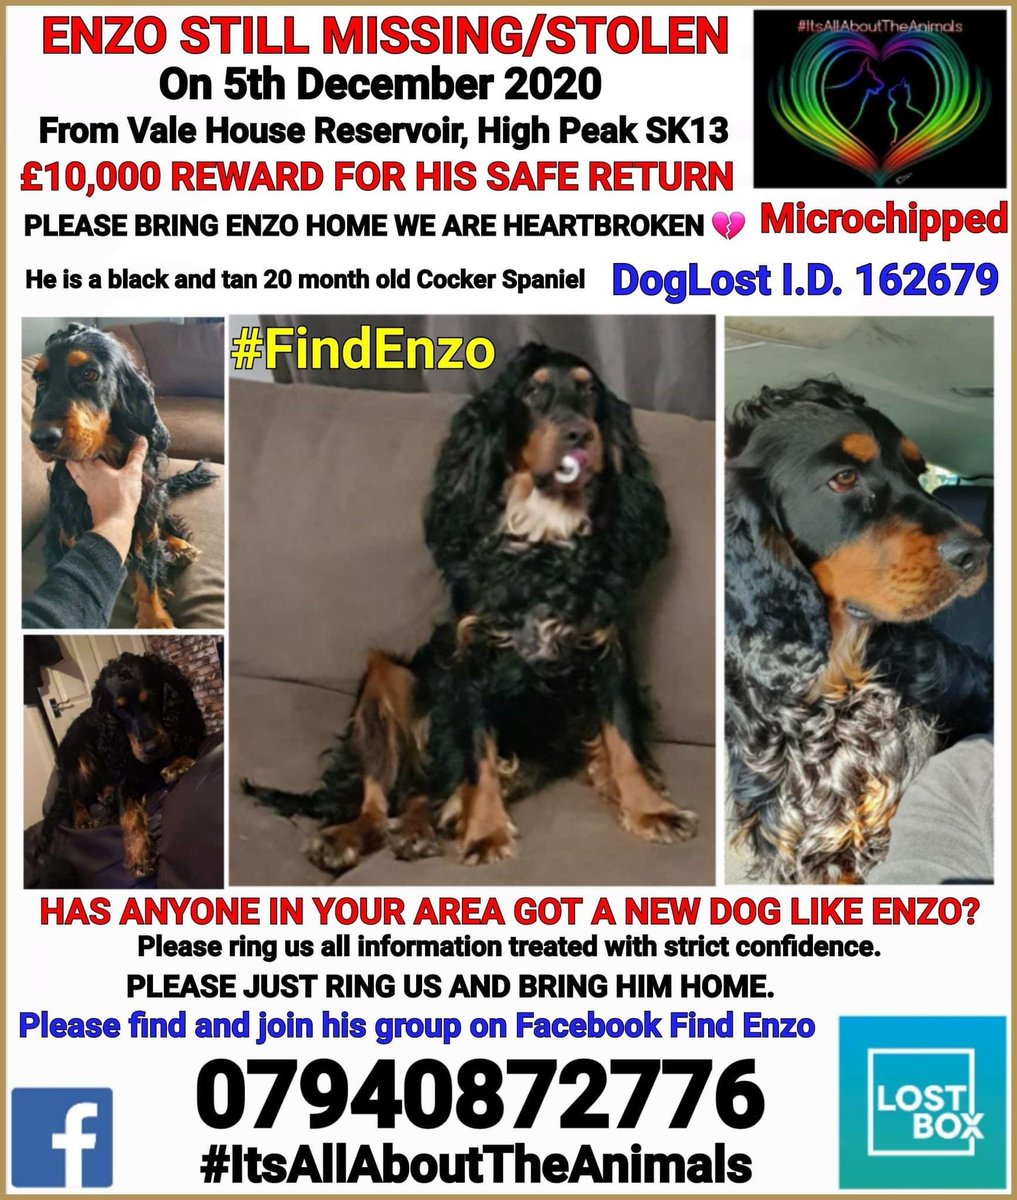 ** Please Please ** can everyone retweet and share . The owners are heartbroken . £10,000 reward. We need to make him too hot to handle #missingdog #stolendog #findenzo